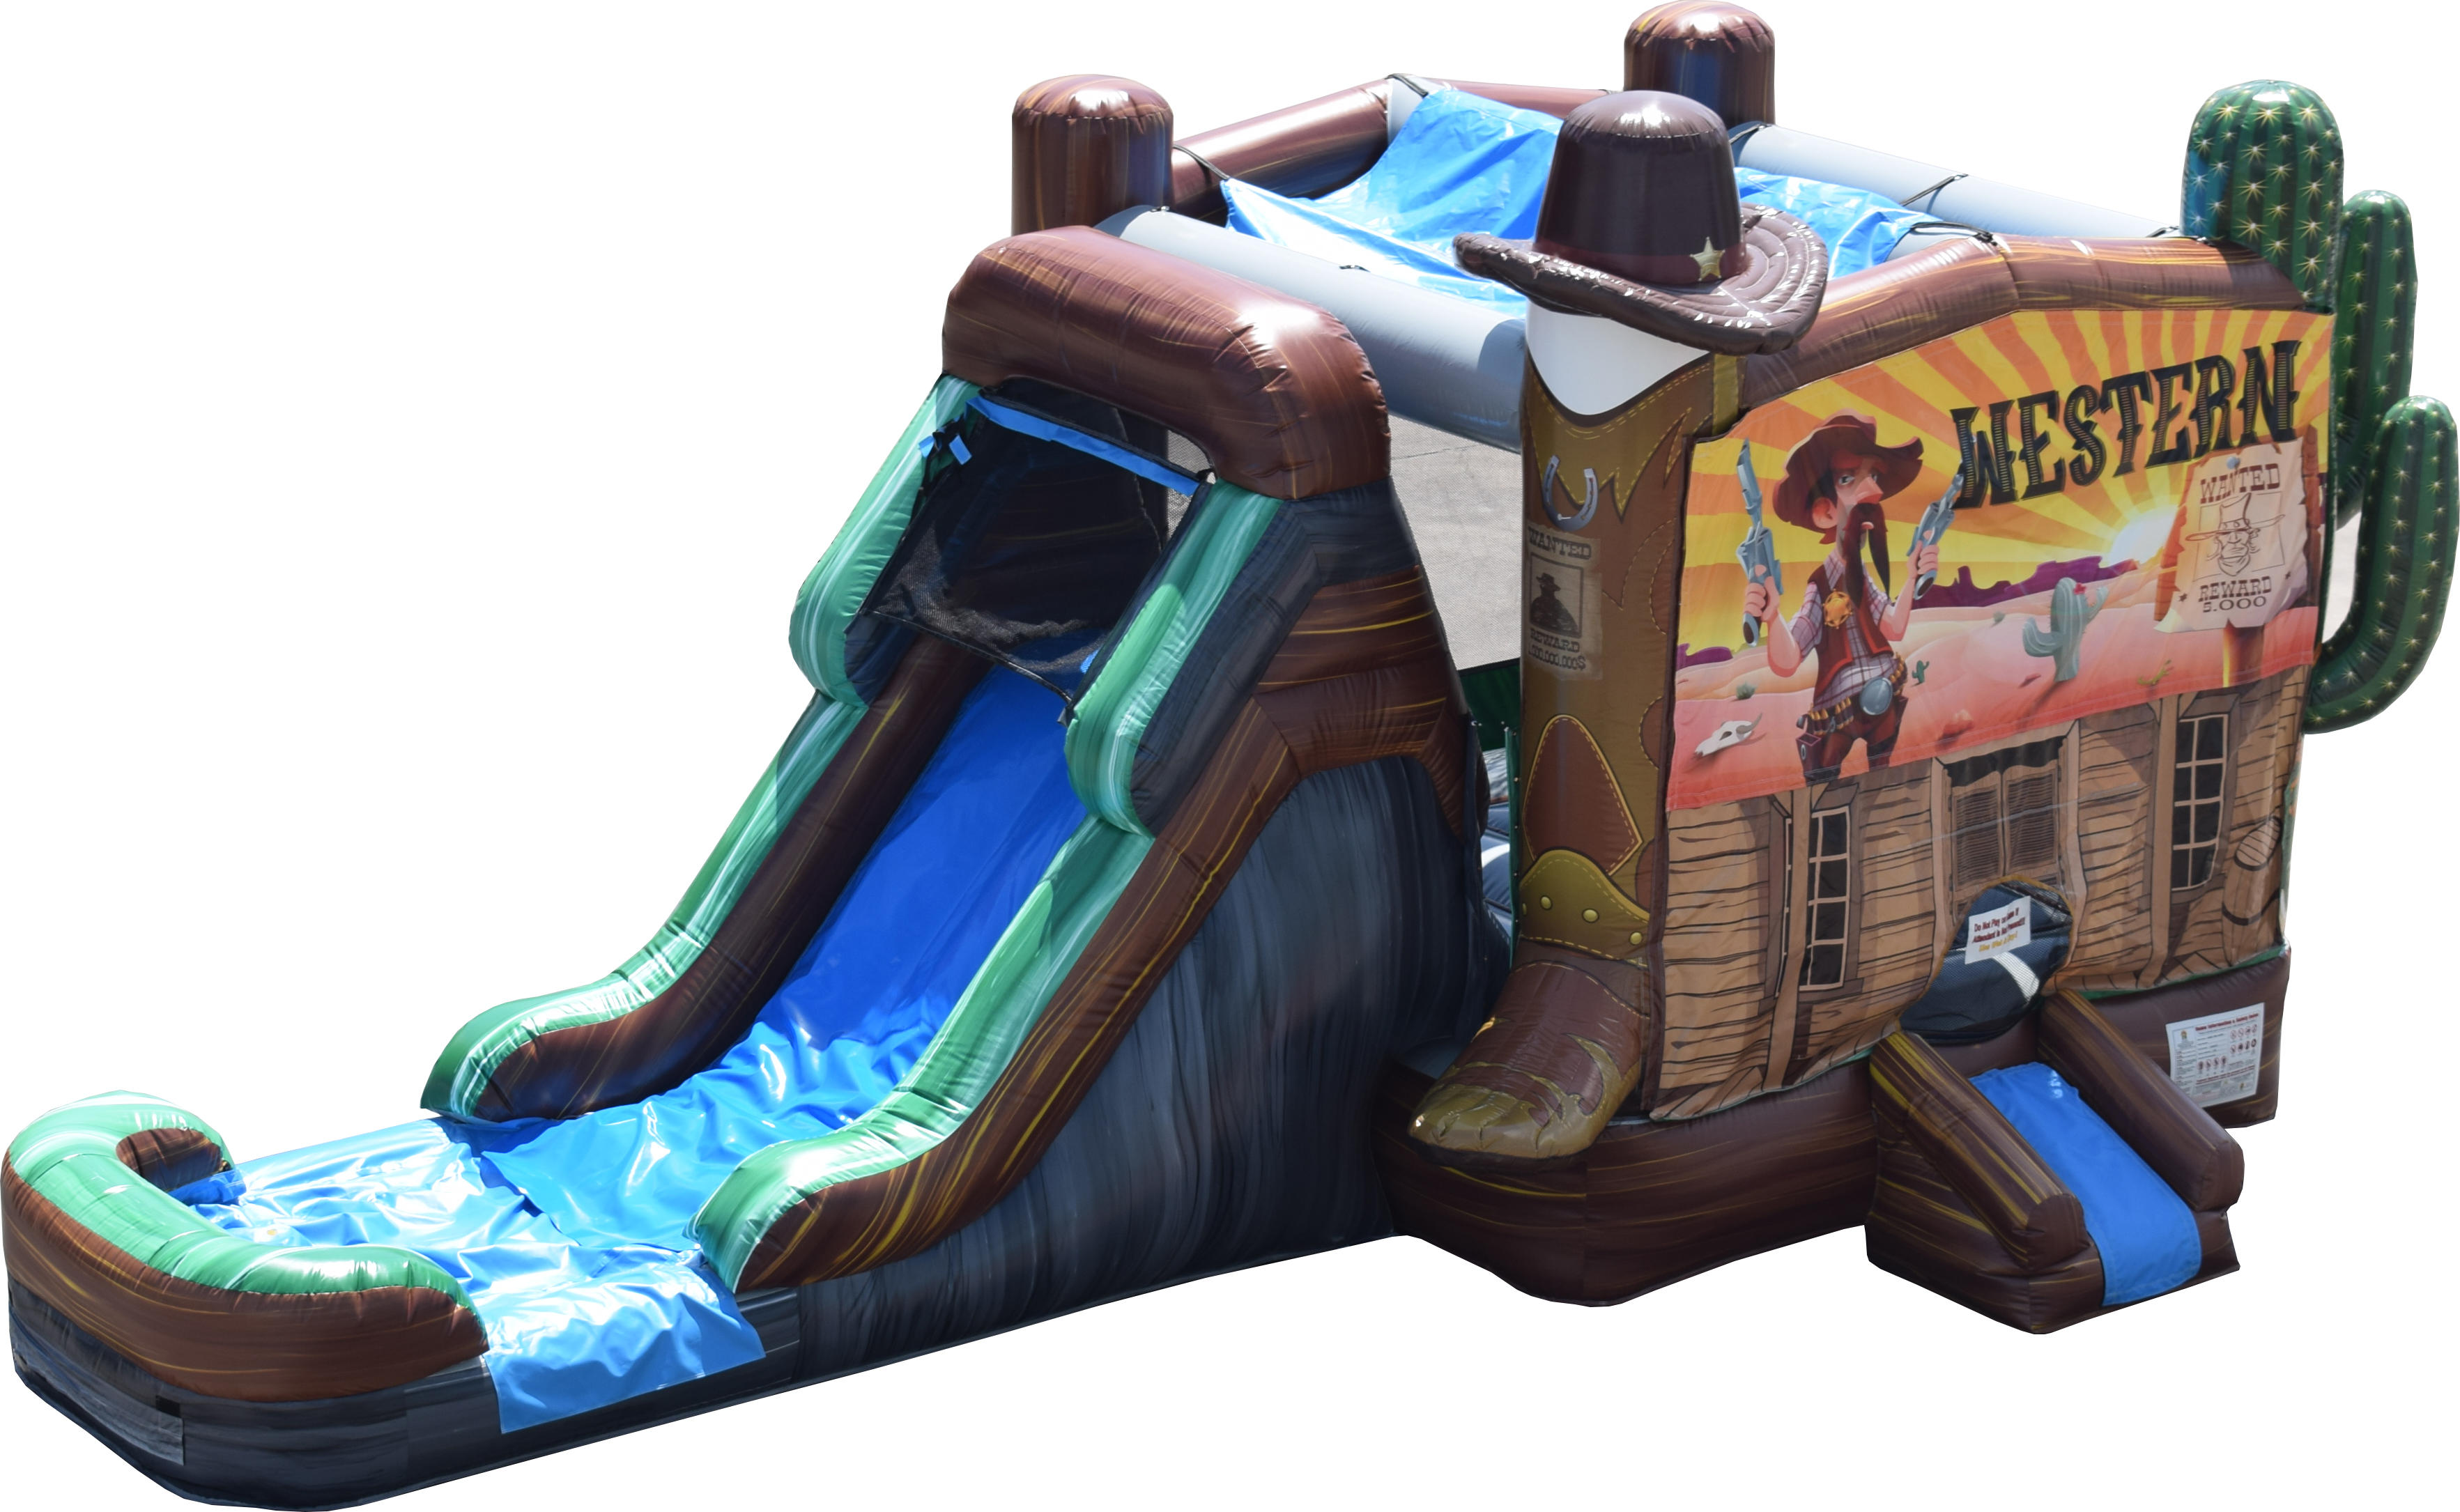 This beautiful action packed western theme inflatable for rent can be found all over in the Hamptons, Nassau county and Suffolk County....
 
Comes with basketball net...Client supplies the ball....Rock climbing steps
bounce and slide.............
 
This western inflatable is the perfect addition for all your western theme inflatable parties.....Don't forget to add the Mechanical bull rental with some tent, table and chair rentals...........